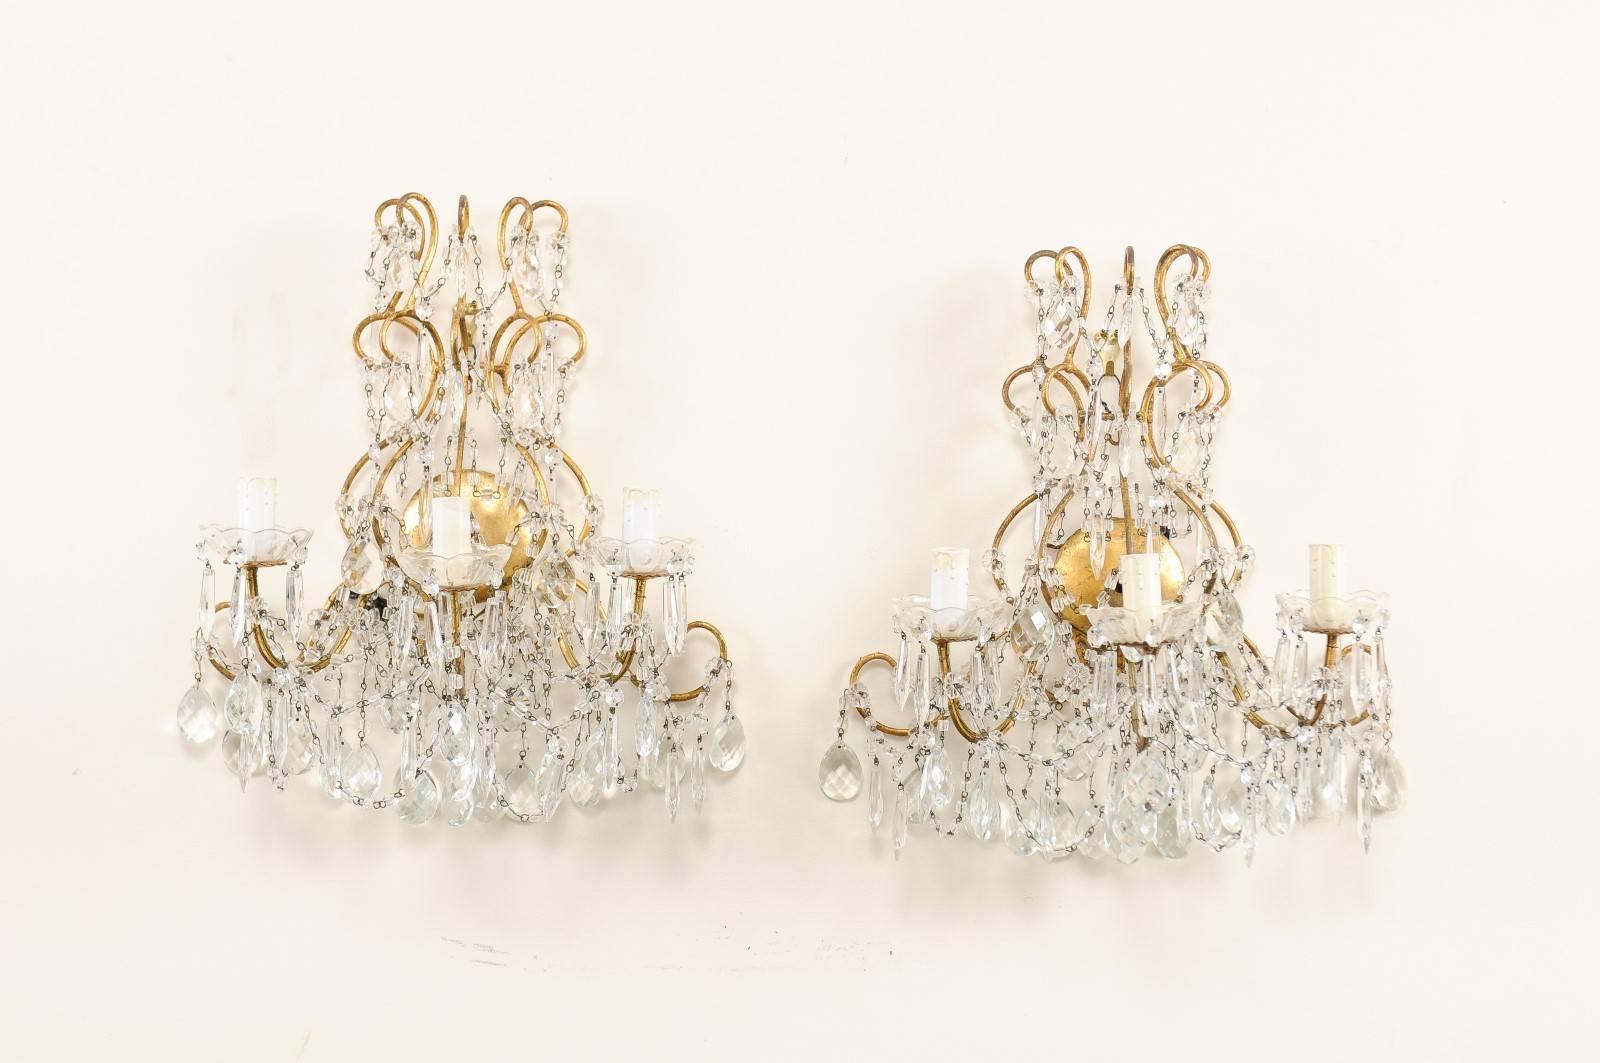 A pair of Italian vintage three-light crystal sconces. This pair of Italian crystal sconces each feature a variety of faceted crystals ornately decorating the scrolled and gilded metal armature and arms. Strands of crystals are heavily draped